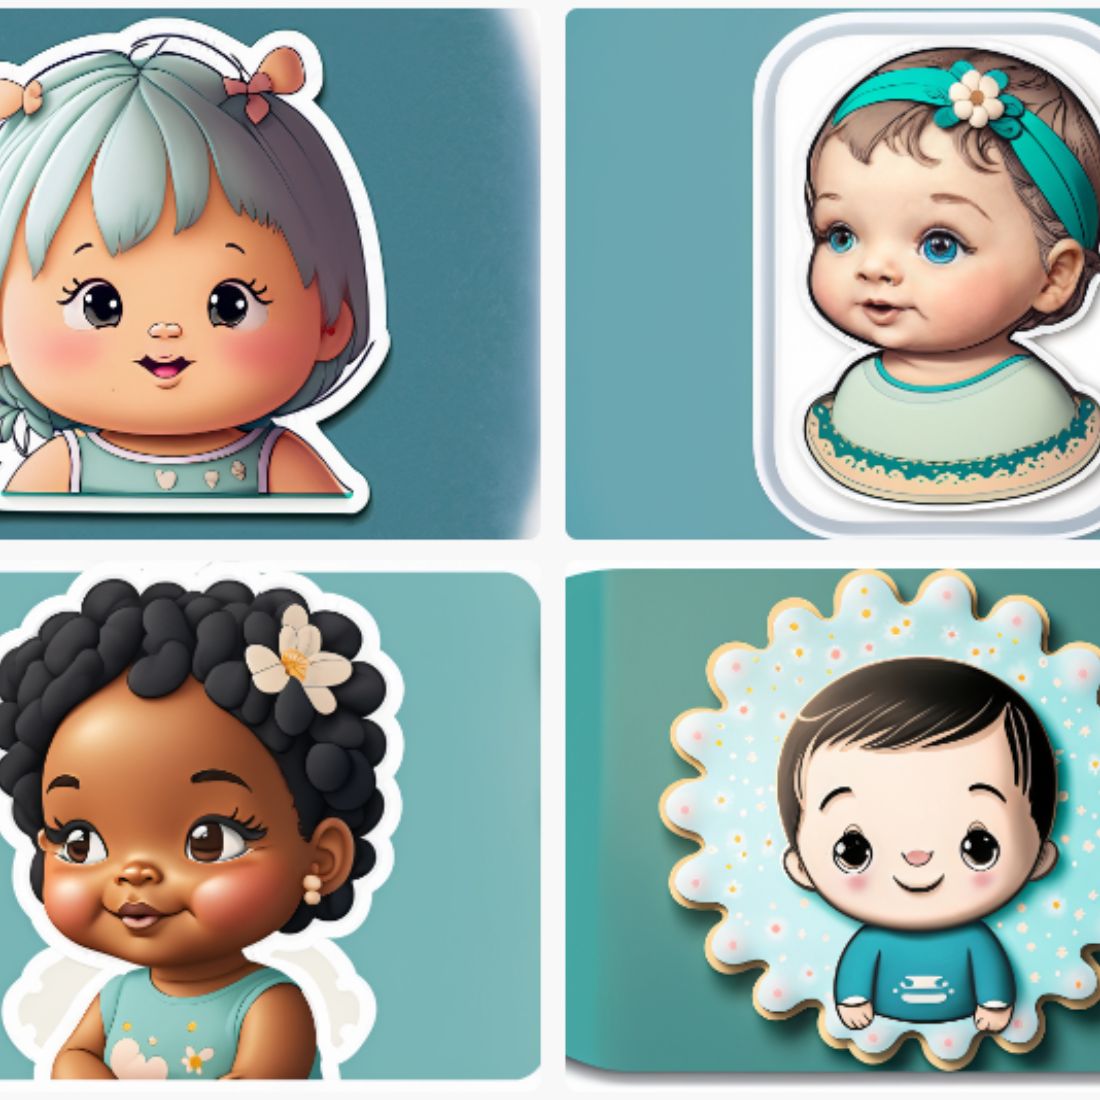 Cute Stickers design prompt for Midjourney cover image.